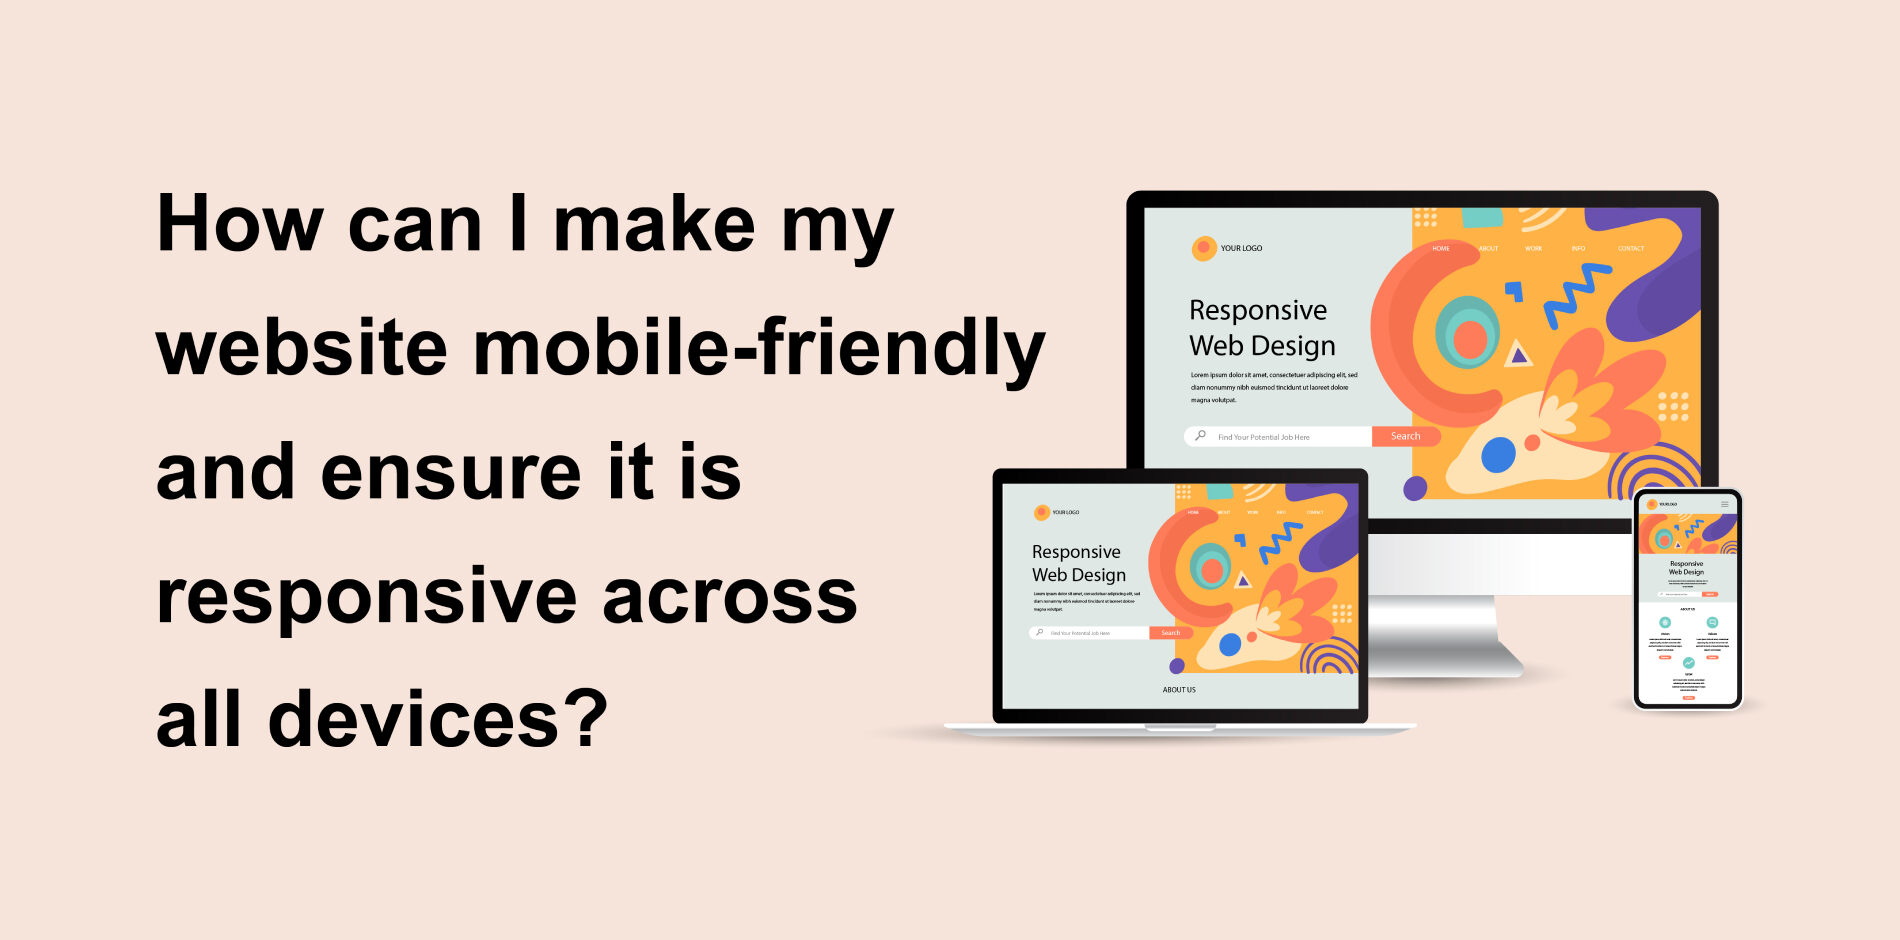 How can I make my website mobile-friendly and ensure it is responsive across all devices?